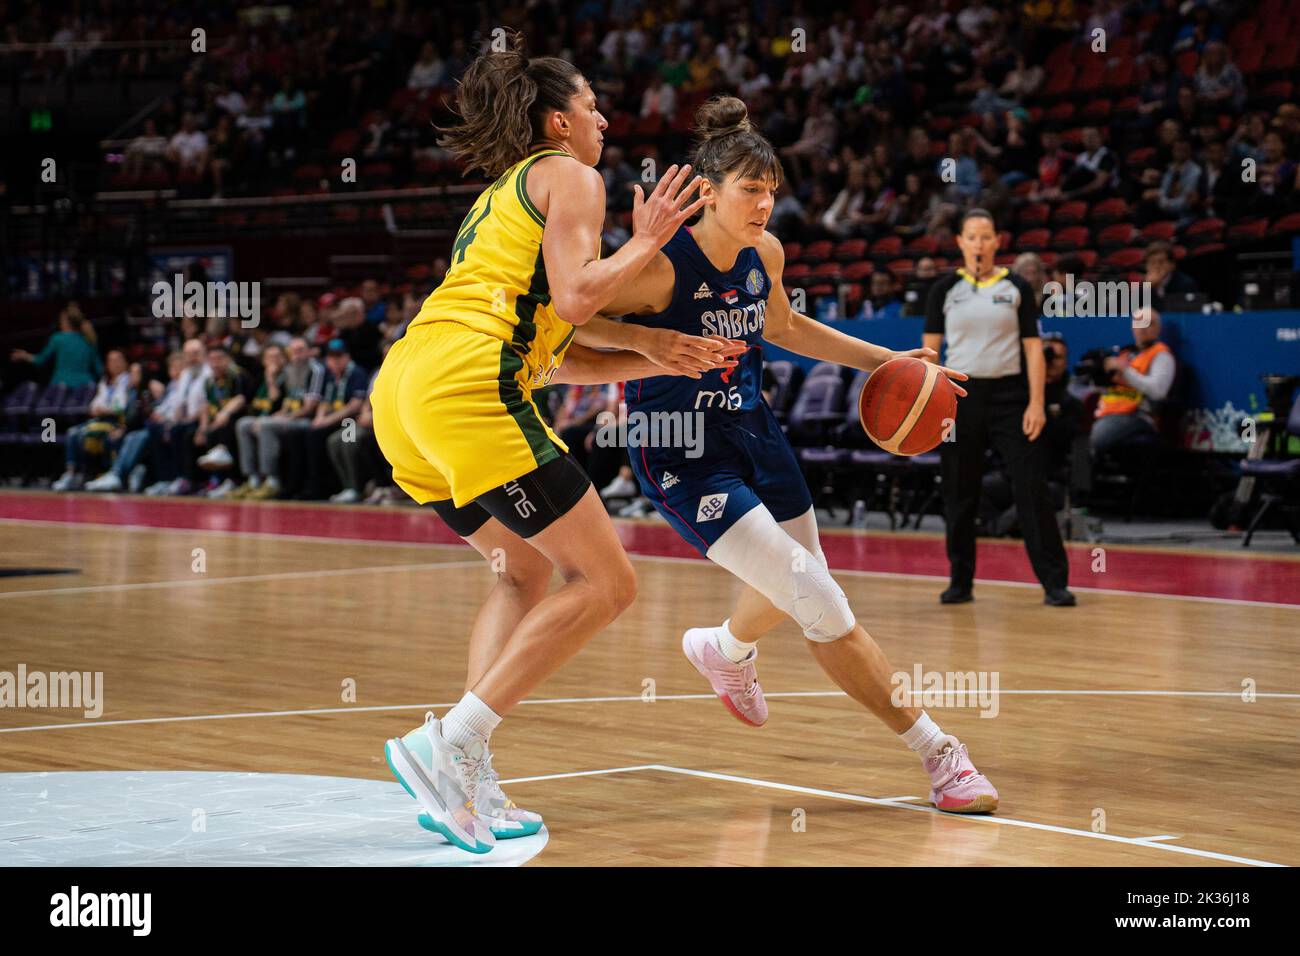 Sydney, Australia. 25th Sep, 2022. Tina Krajisnik (33 Serbia) drives to the basket defended by Marianna Tolo (14 Australia) during the FIBA Womens World Cup 2022 game between Australia and Serbia at the Sydney Superdome in Sydney, Australia. (Foto: Noe Llamas/Sports Press Photo/C - ONE HOUR DEADLINE - ONLY ACTIVATE FTP IF IMAGES LESS THAN ONE HOUR OLD - Alamy) Credit: SPP Sport Press Photo. /Alamy Live News Stock Photo